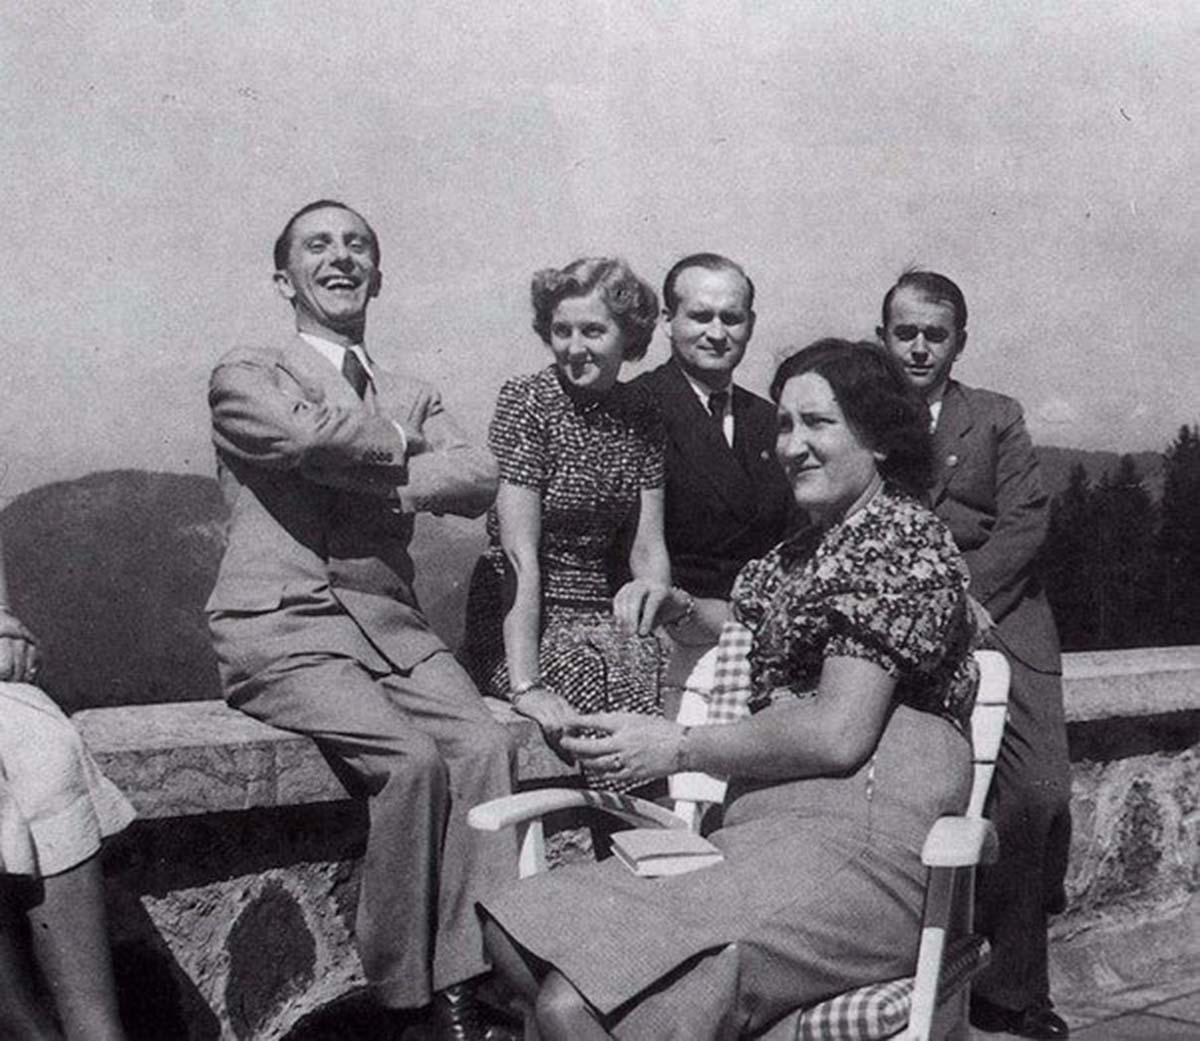 Eva was the life of the party. Here she is with Dr. Goebbels and others. Albert Speer is off to the side looking a bit glum. He was not a big fan of Eva's, and said once, 